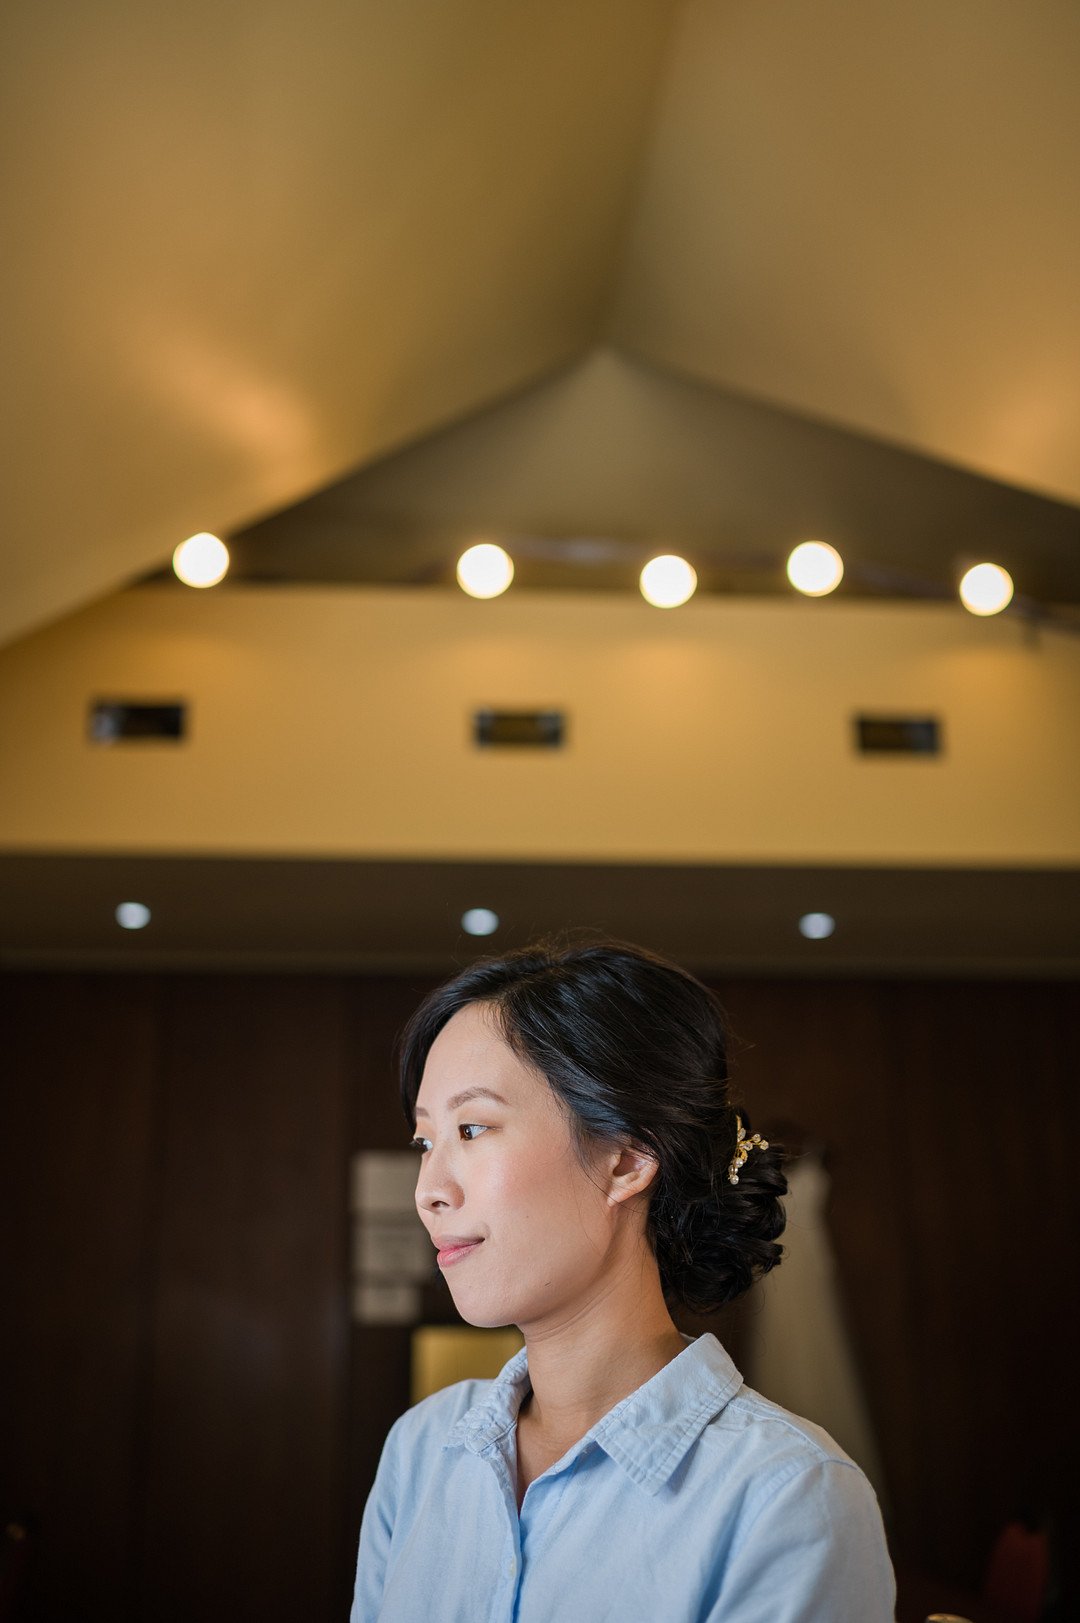 Chan_Chan_Winterlyn Photography_GLESSNER HOUSE CHICAGO WEDDING-13_low.jpg